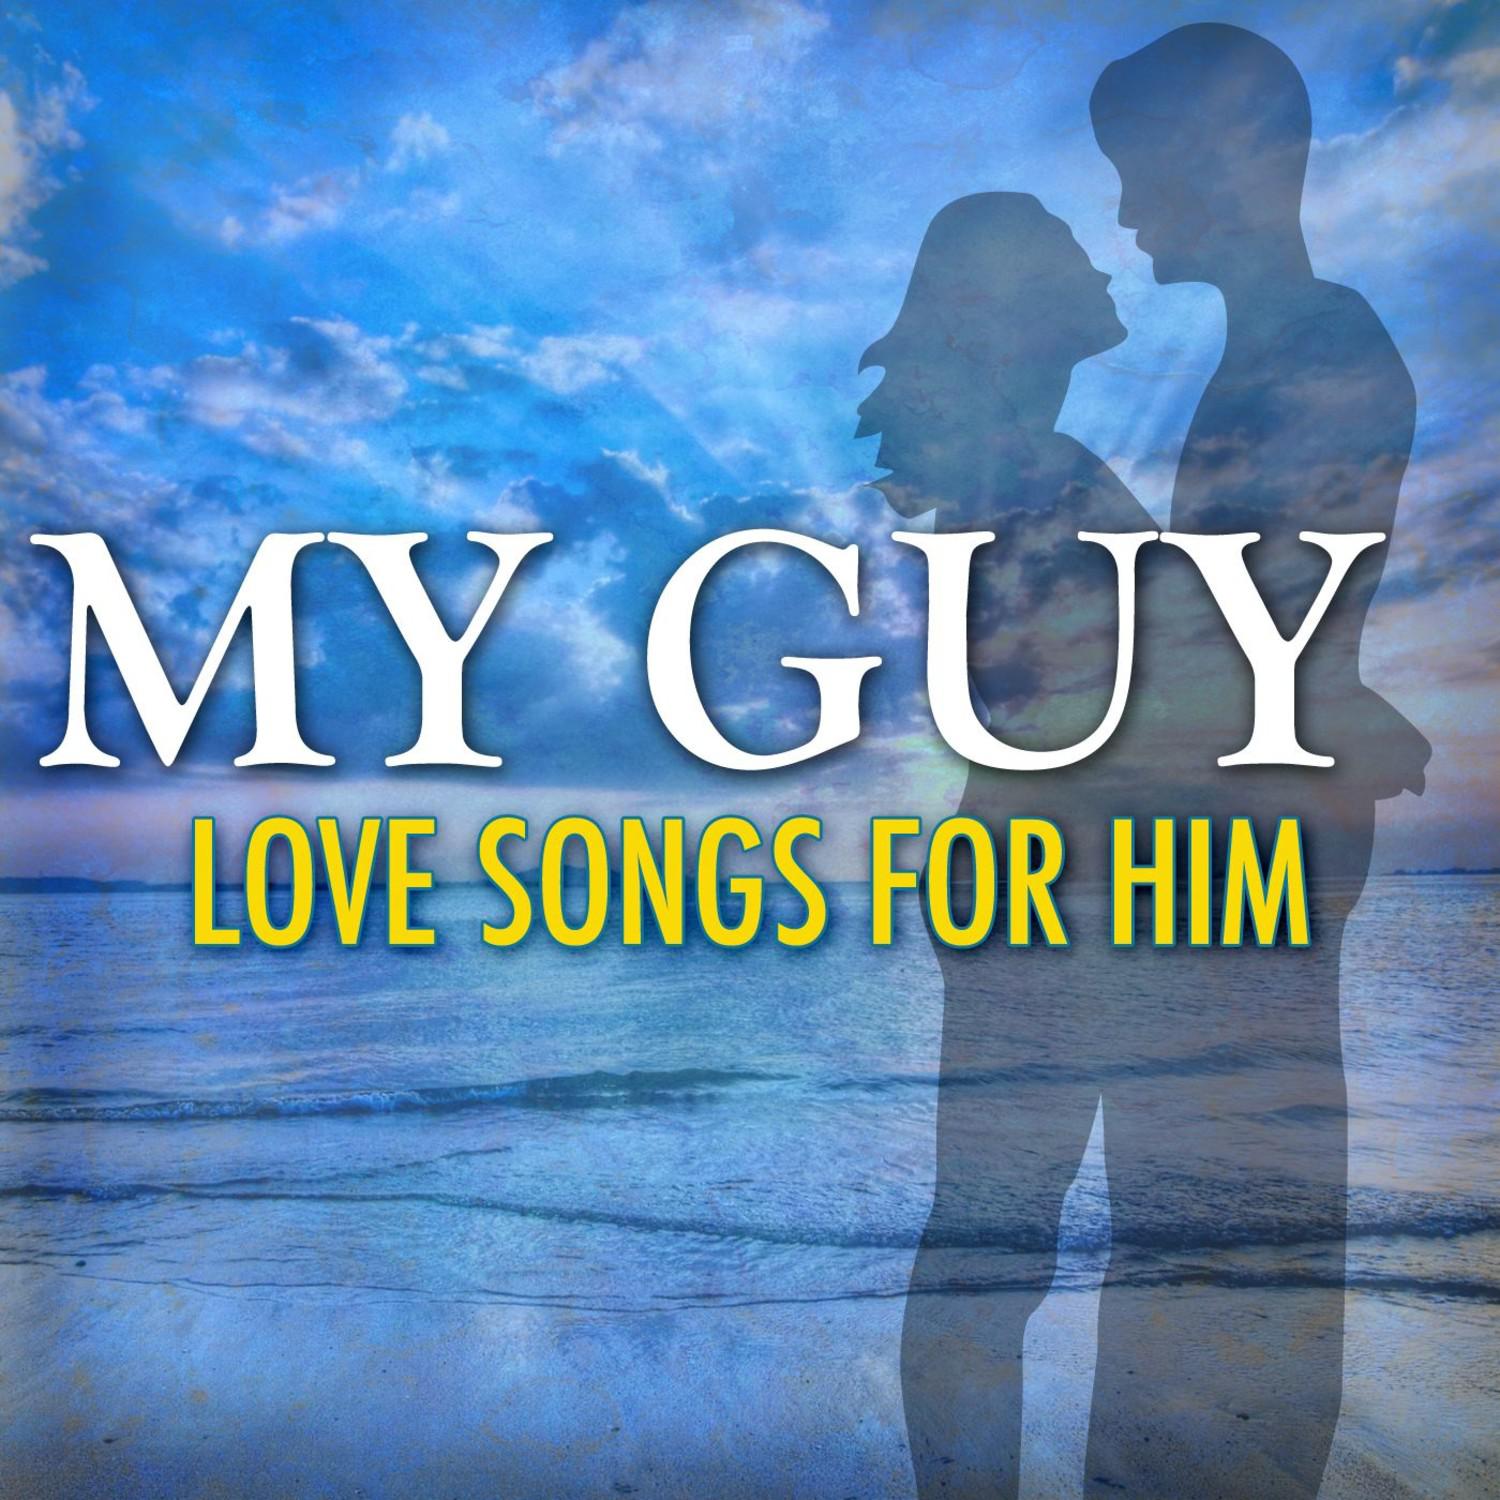 My Guy: Love Songs For Him